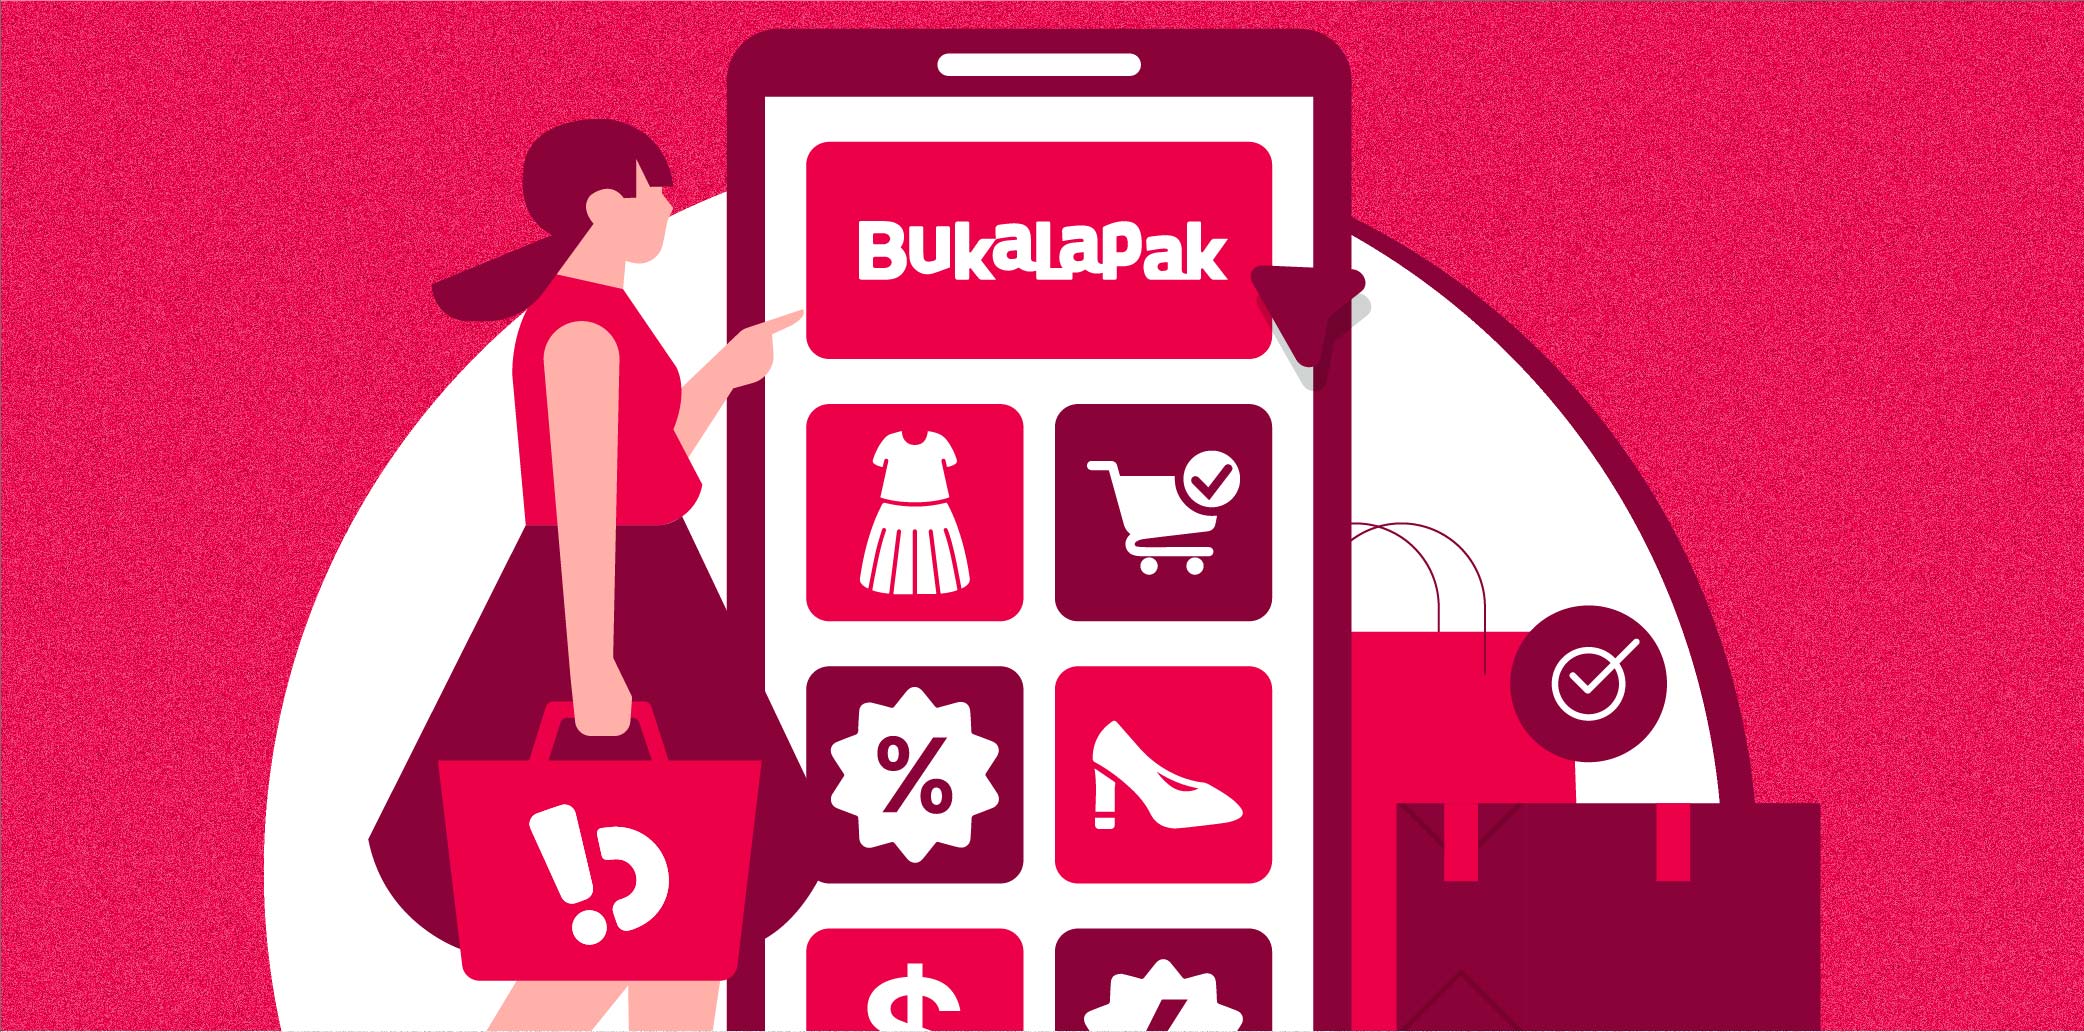 Indonesia’s Bukalapak expects wider loss in 2022